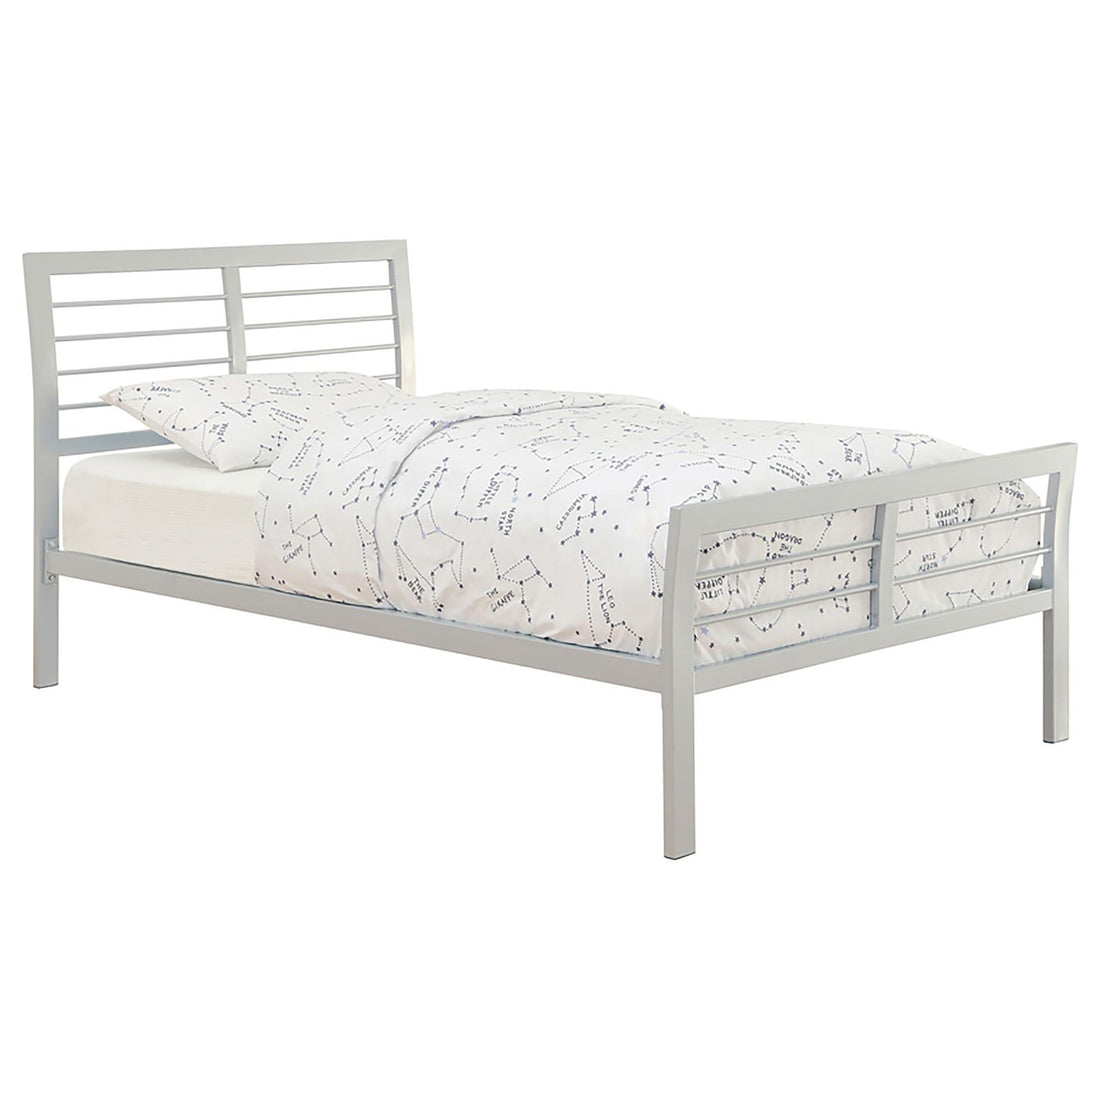 Silver Full Metal Bed box spring not